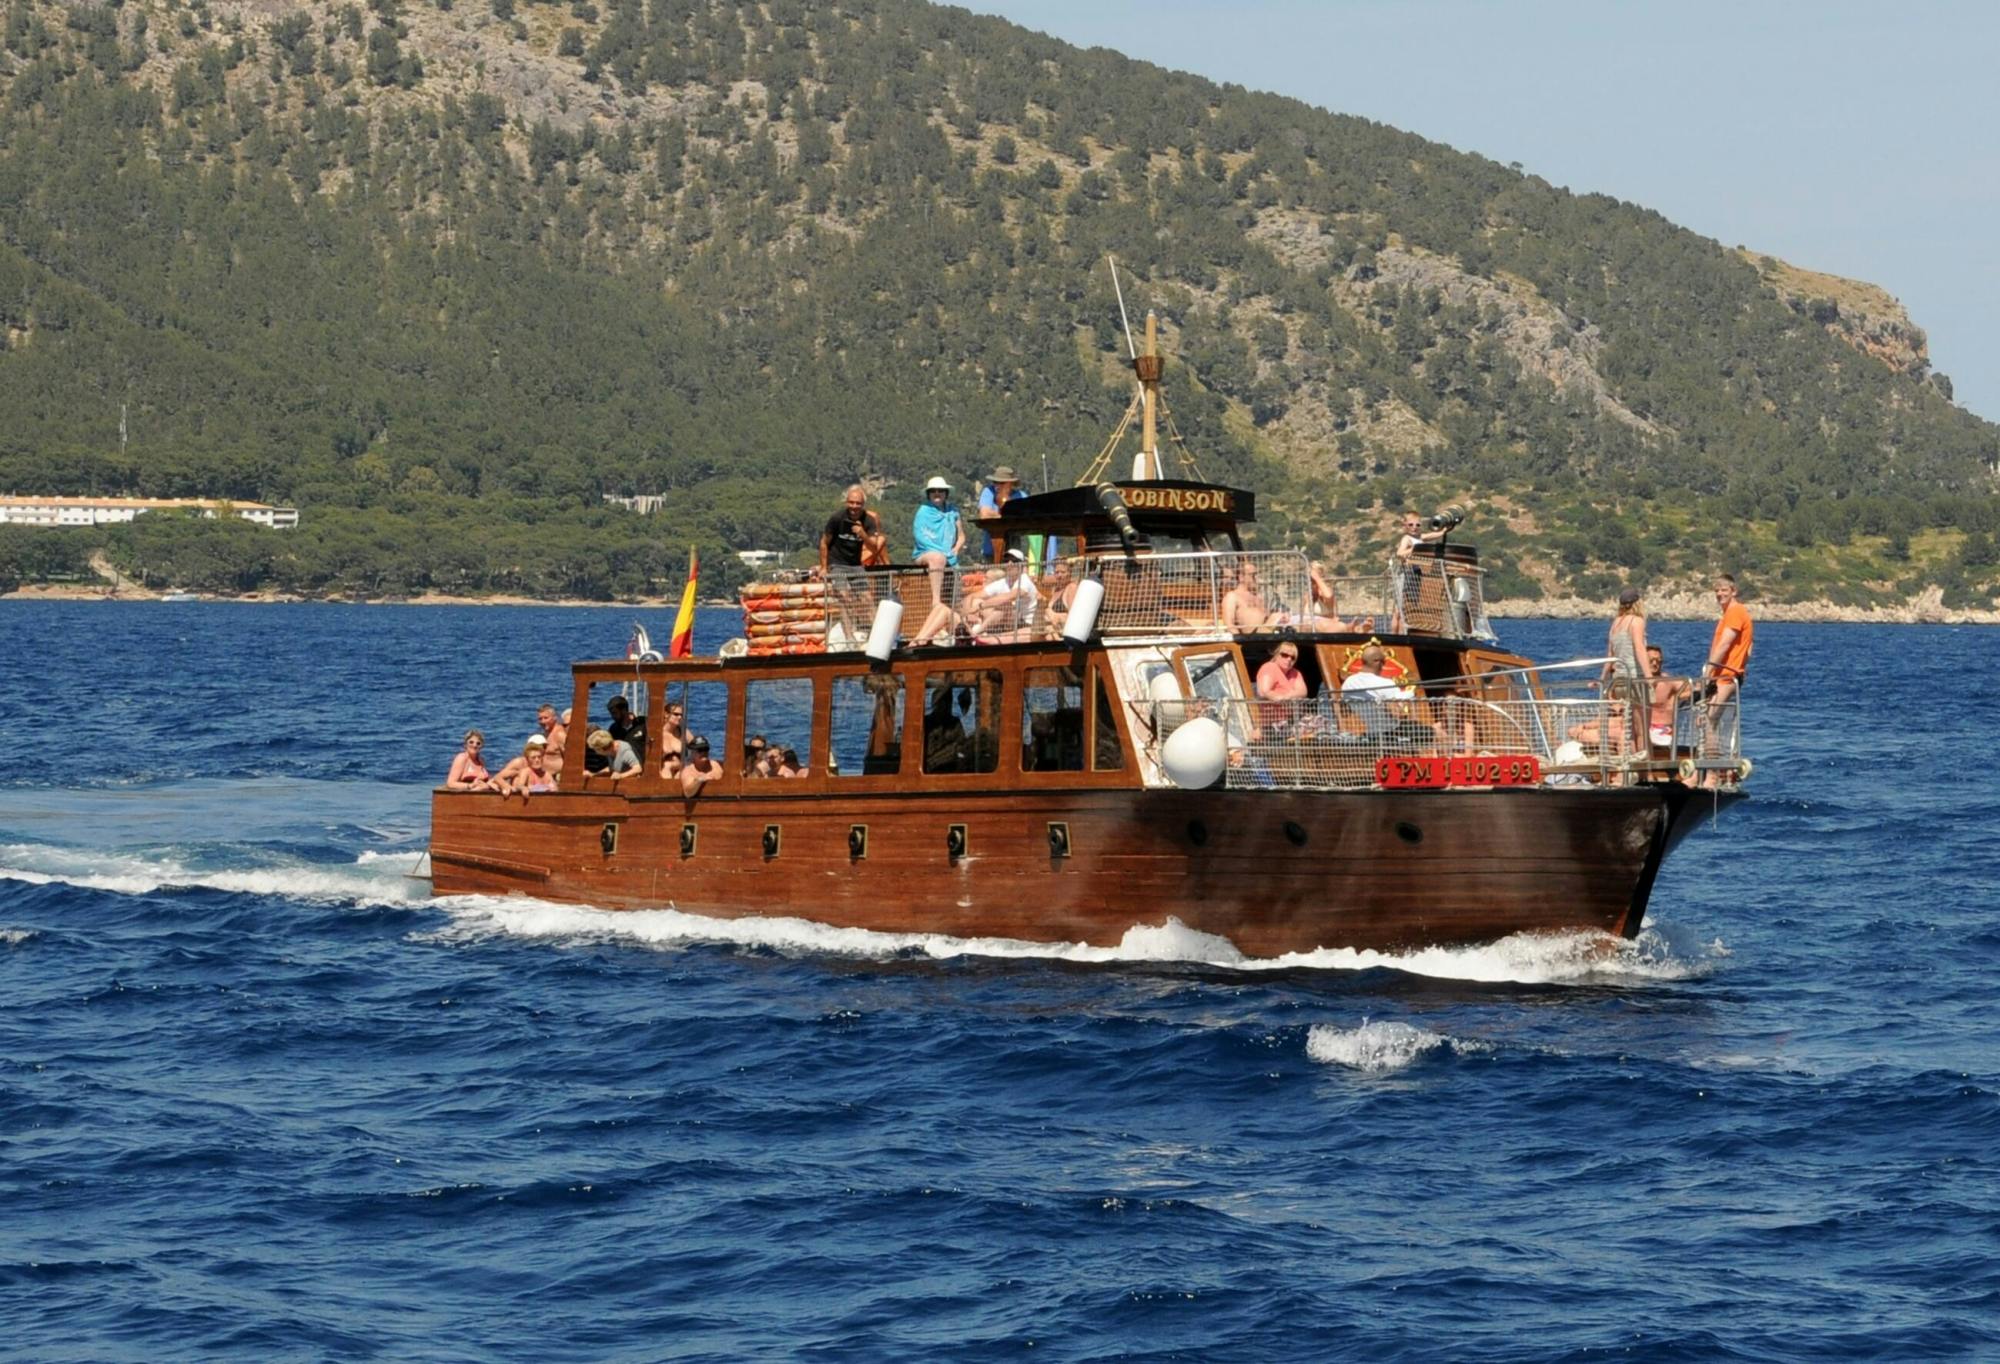 Robinson Adventure Boat Cruise With Transfer from the North of Majorca